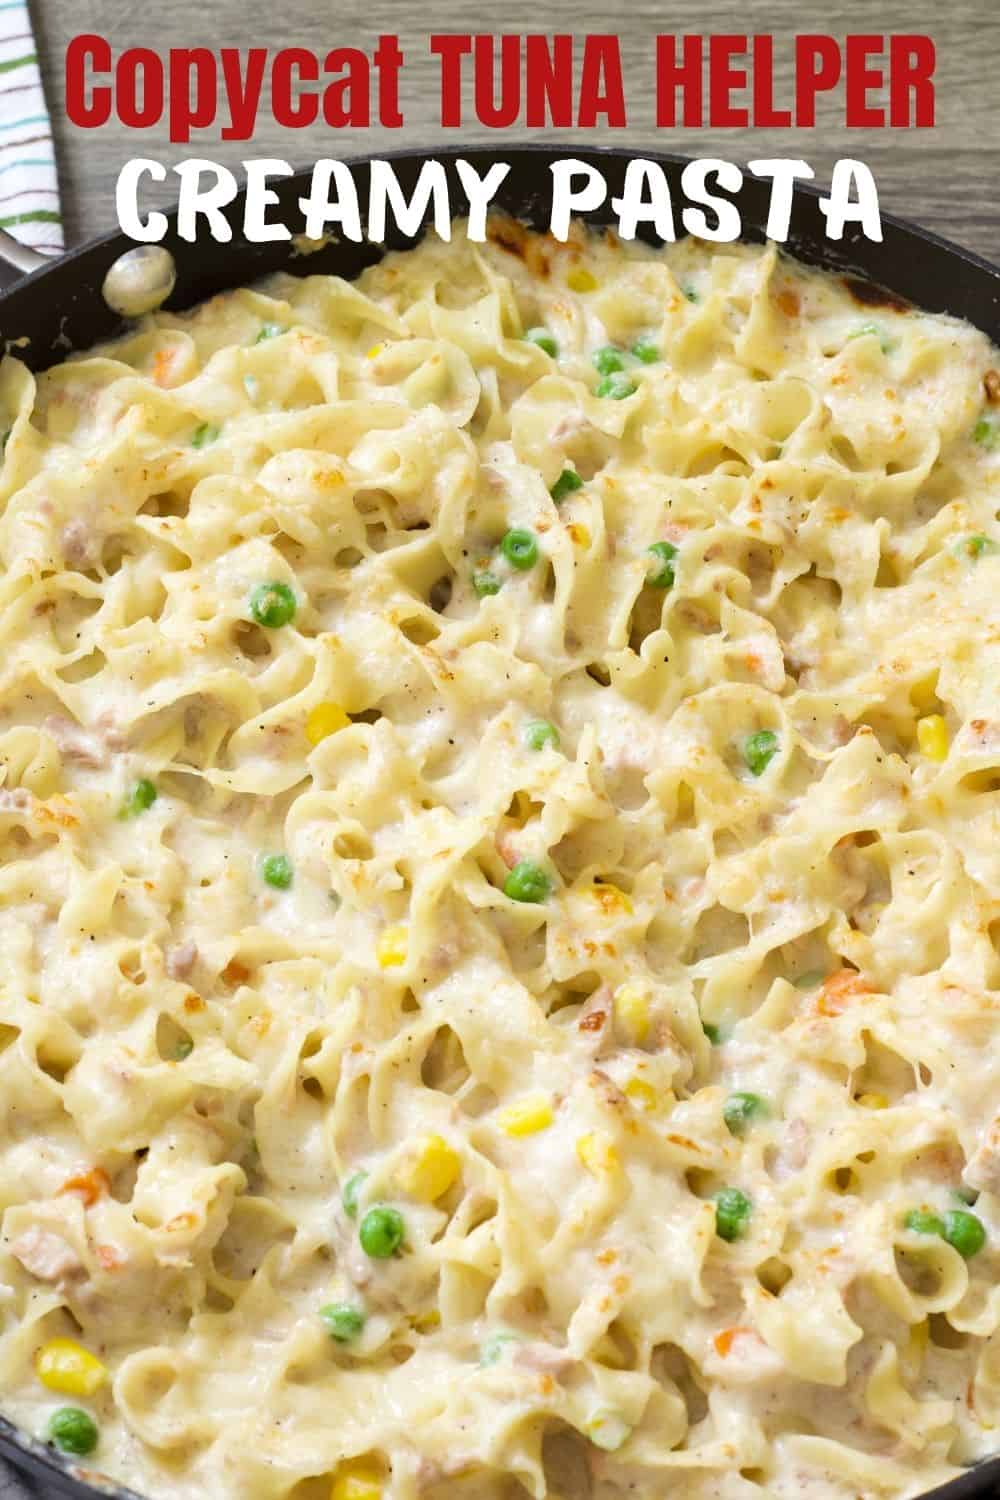 Homemade Tuna Helper Creamy Pasta is a healthier version of the popular boxed dinner. It is just as easy and your family will love it! #copycatrecipe #tunanoodlecasserole #kidfriendlyrecipe #easydinneridea via @mindyscookingobsession